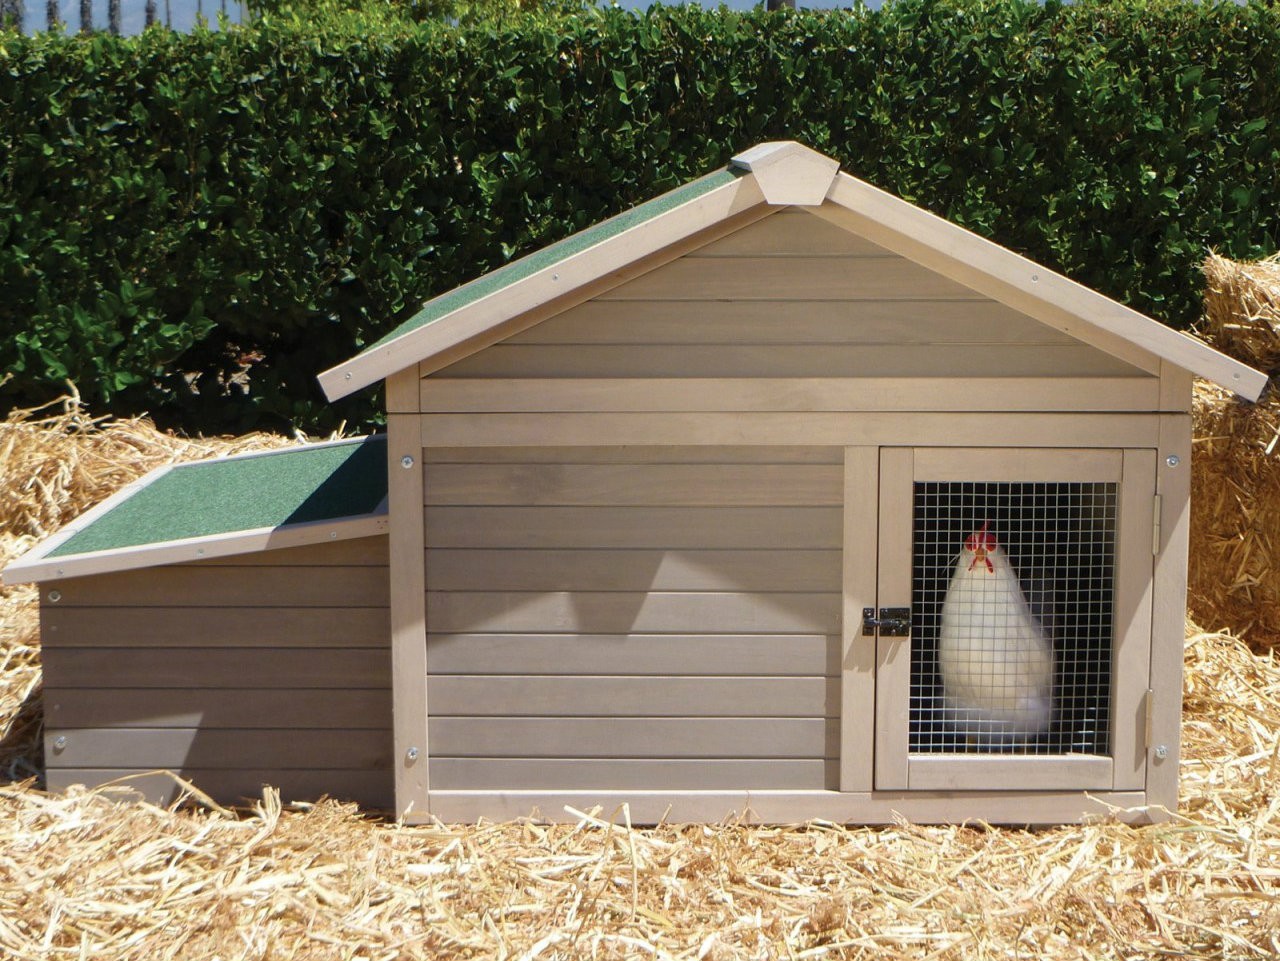 Barn Shaped Chicken Coop - Build Your Own Chicken Coop. Save $1000 Get 